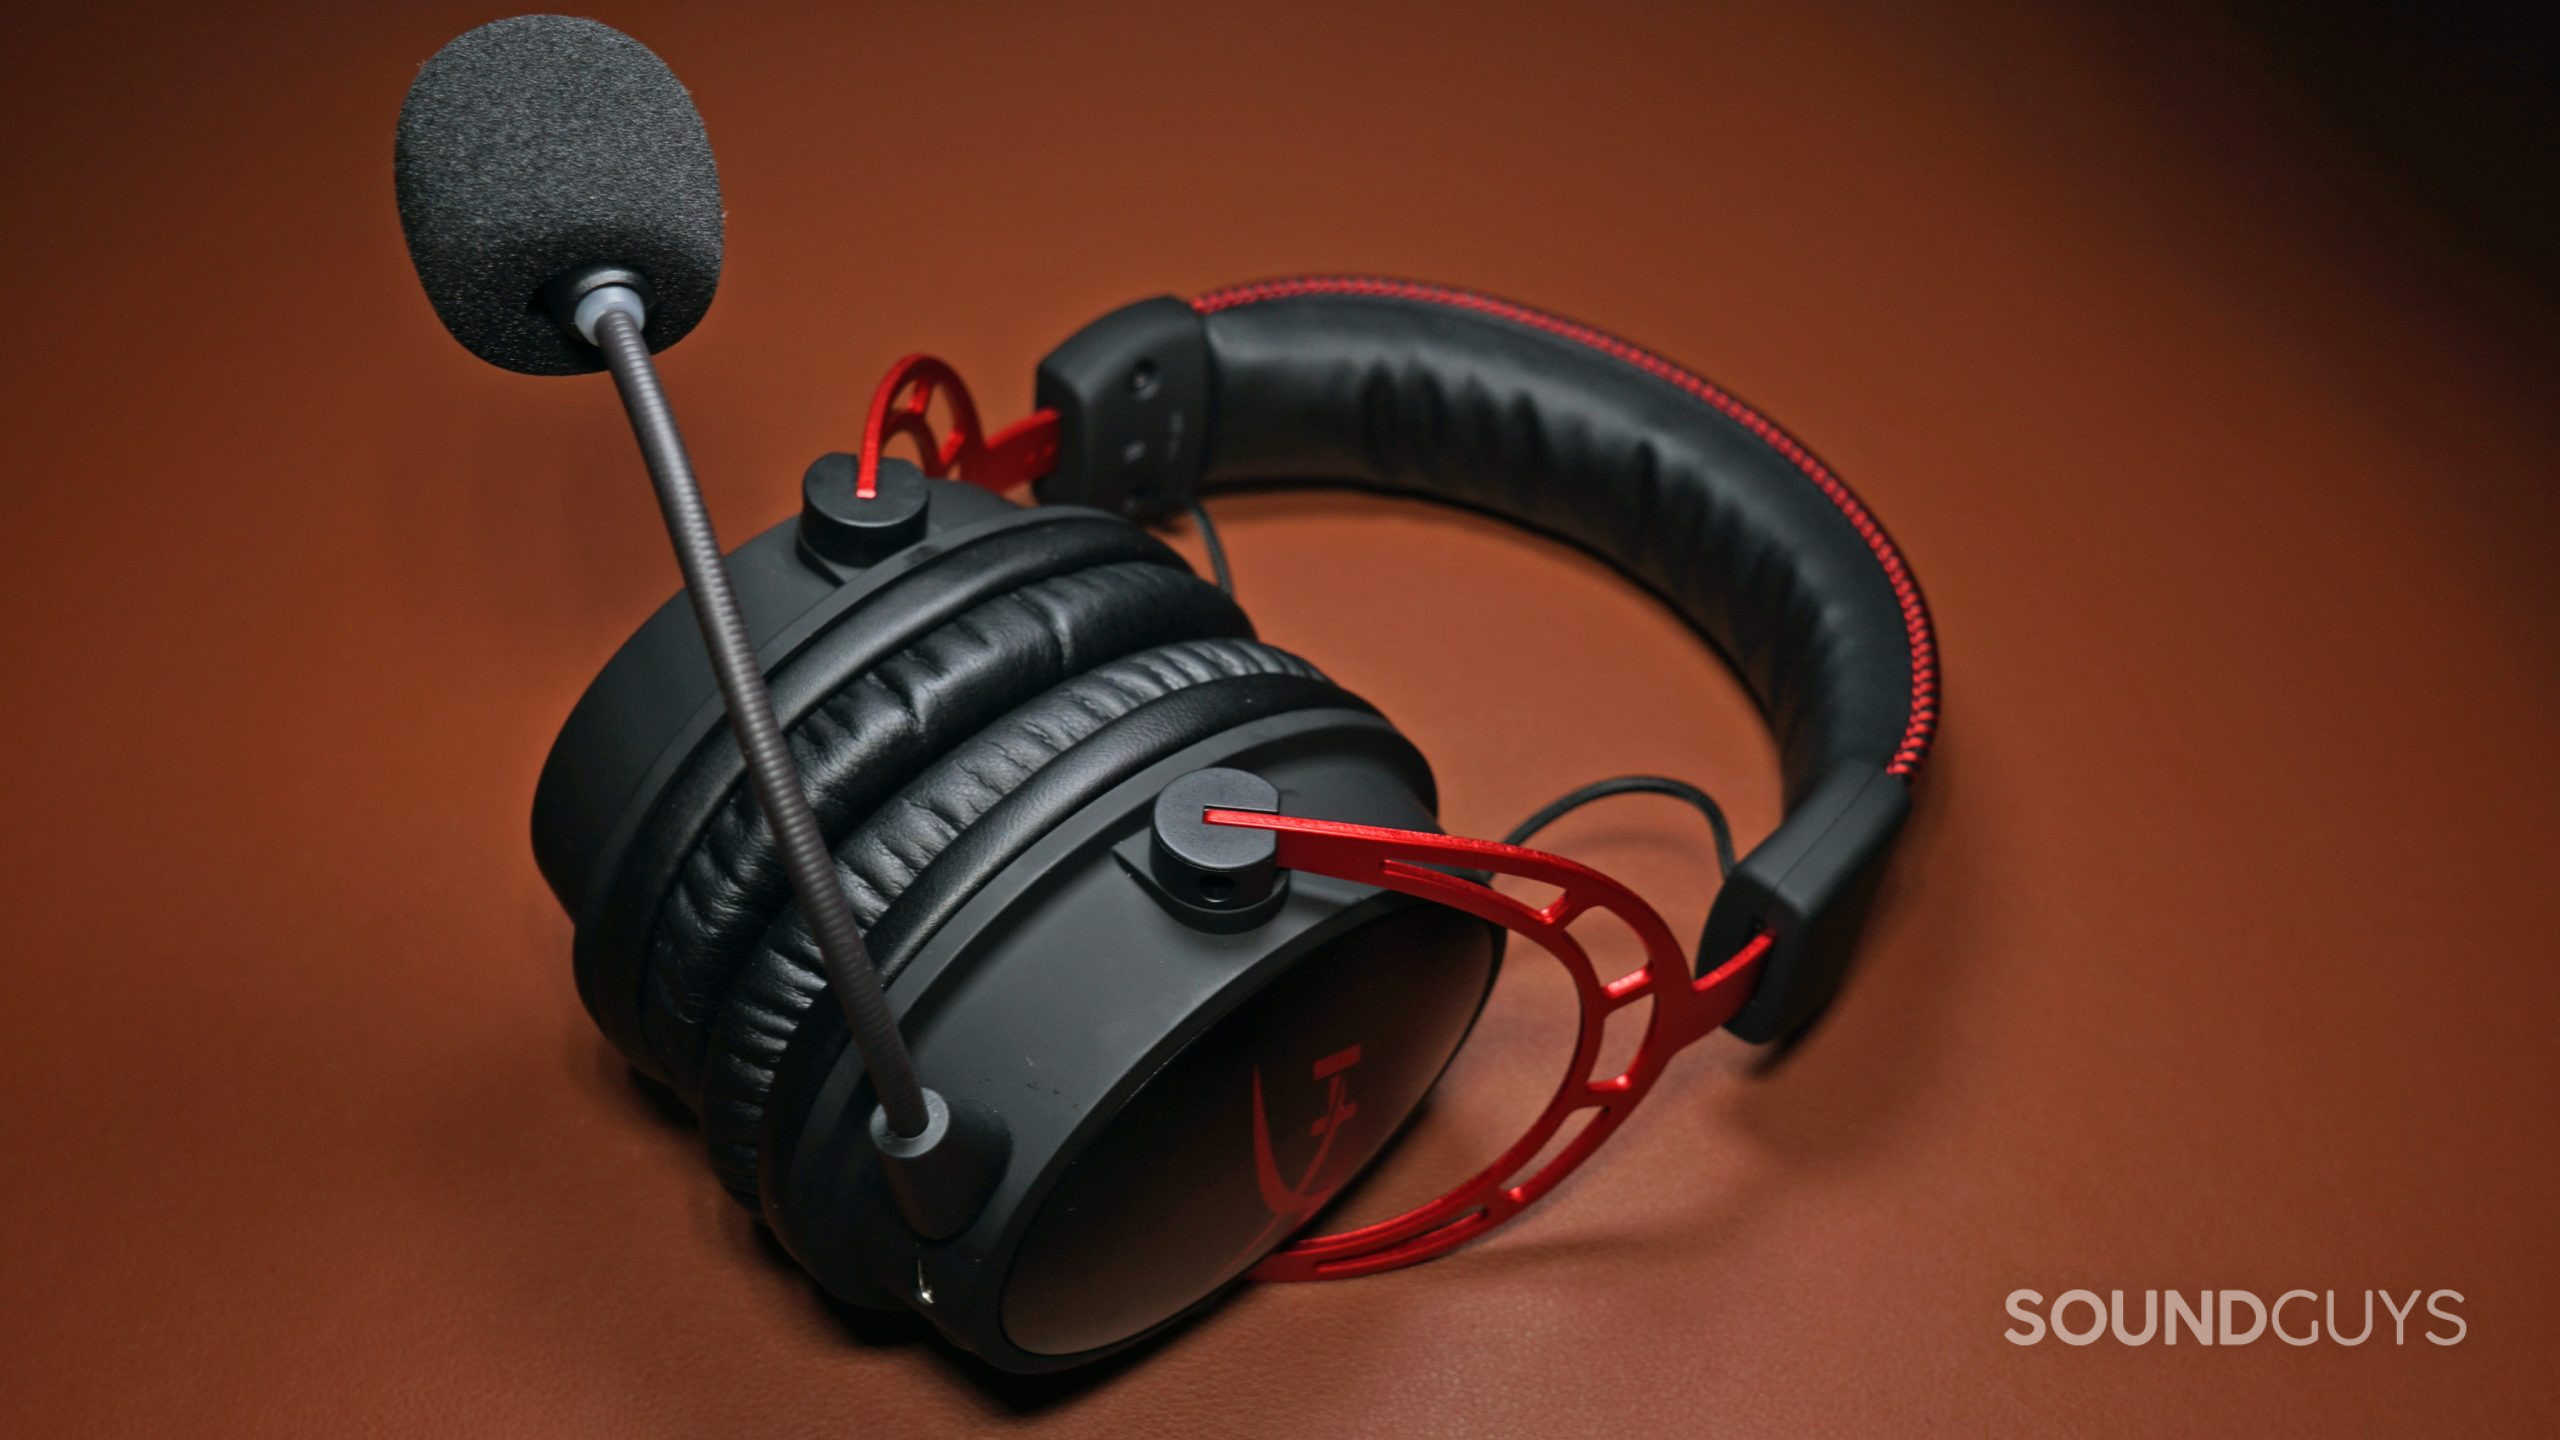 The HyperX Cloud Alpha Wireless lays on a leather surface with its boom mic attached.